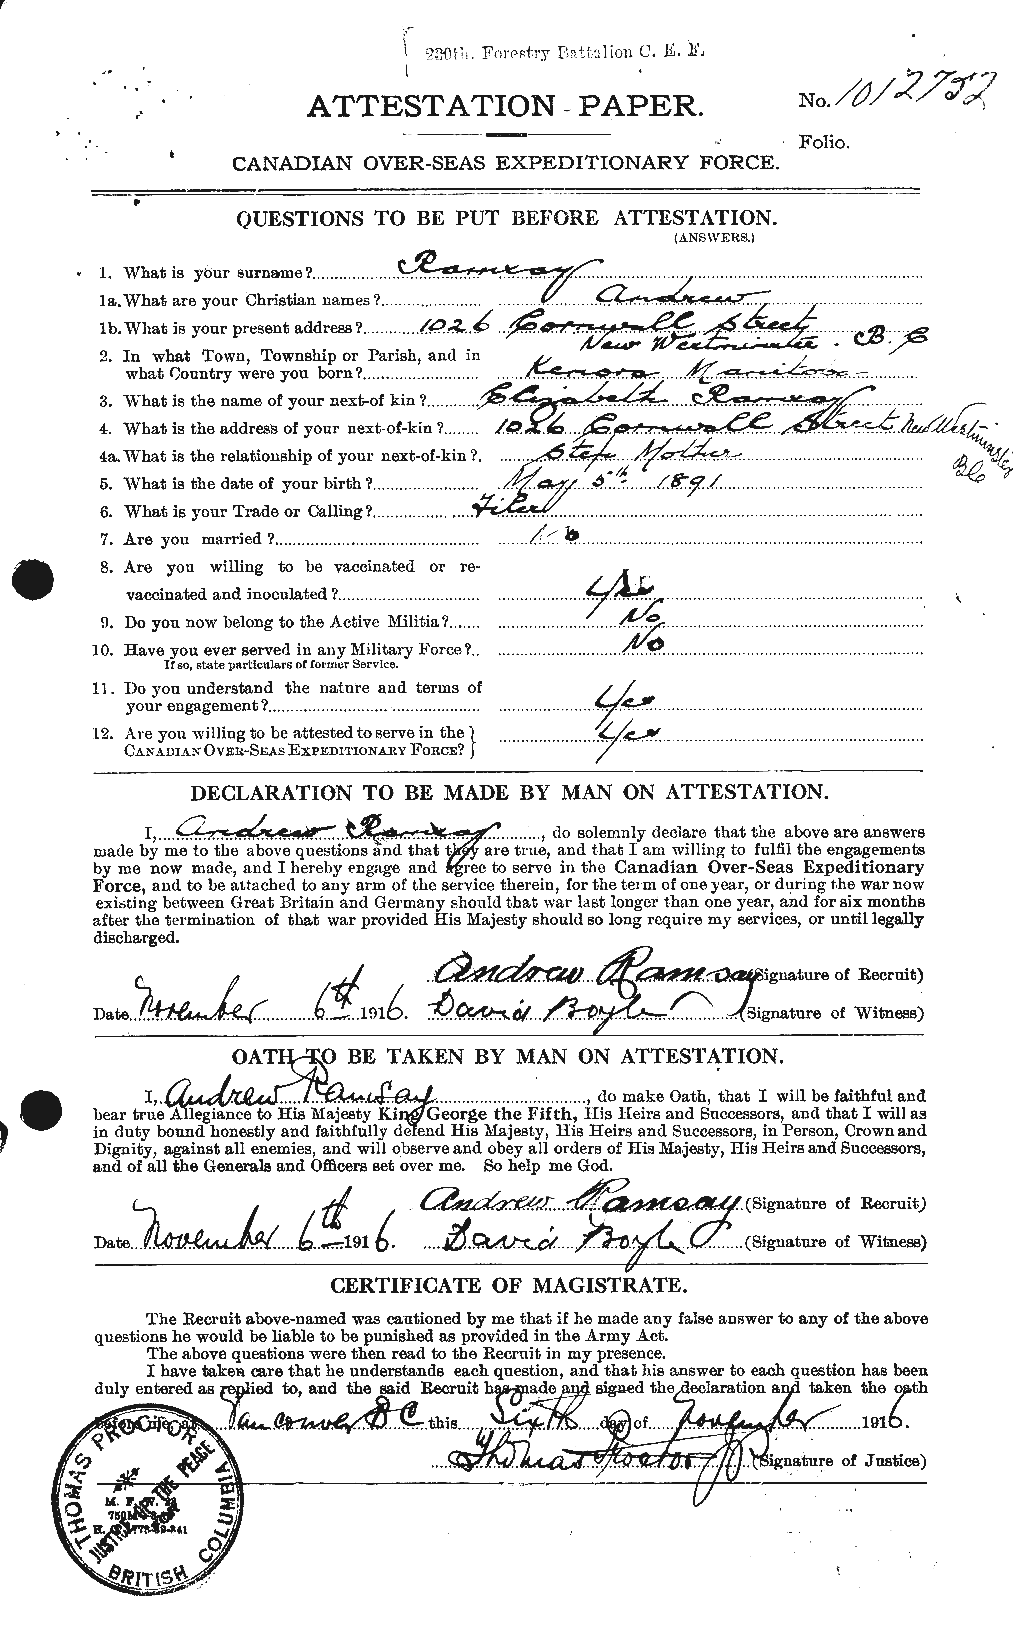 Personnel Records of the First World War - CEF 592421a